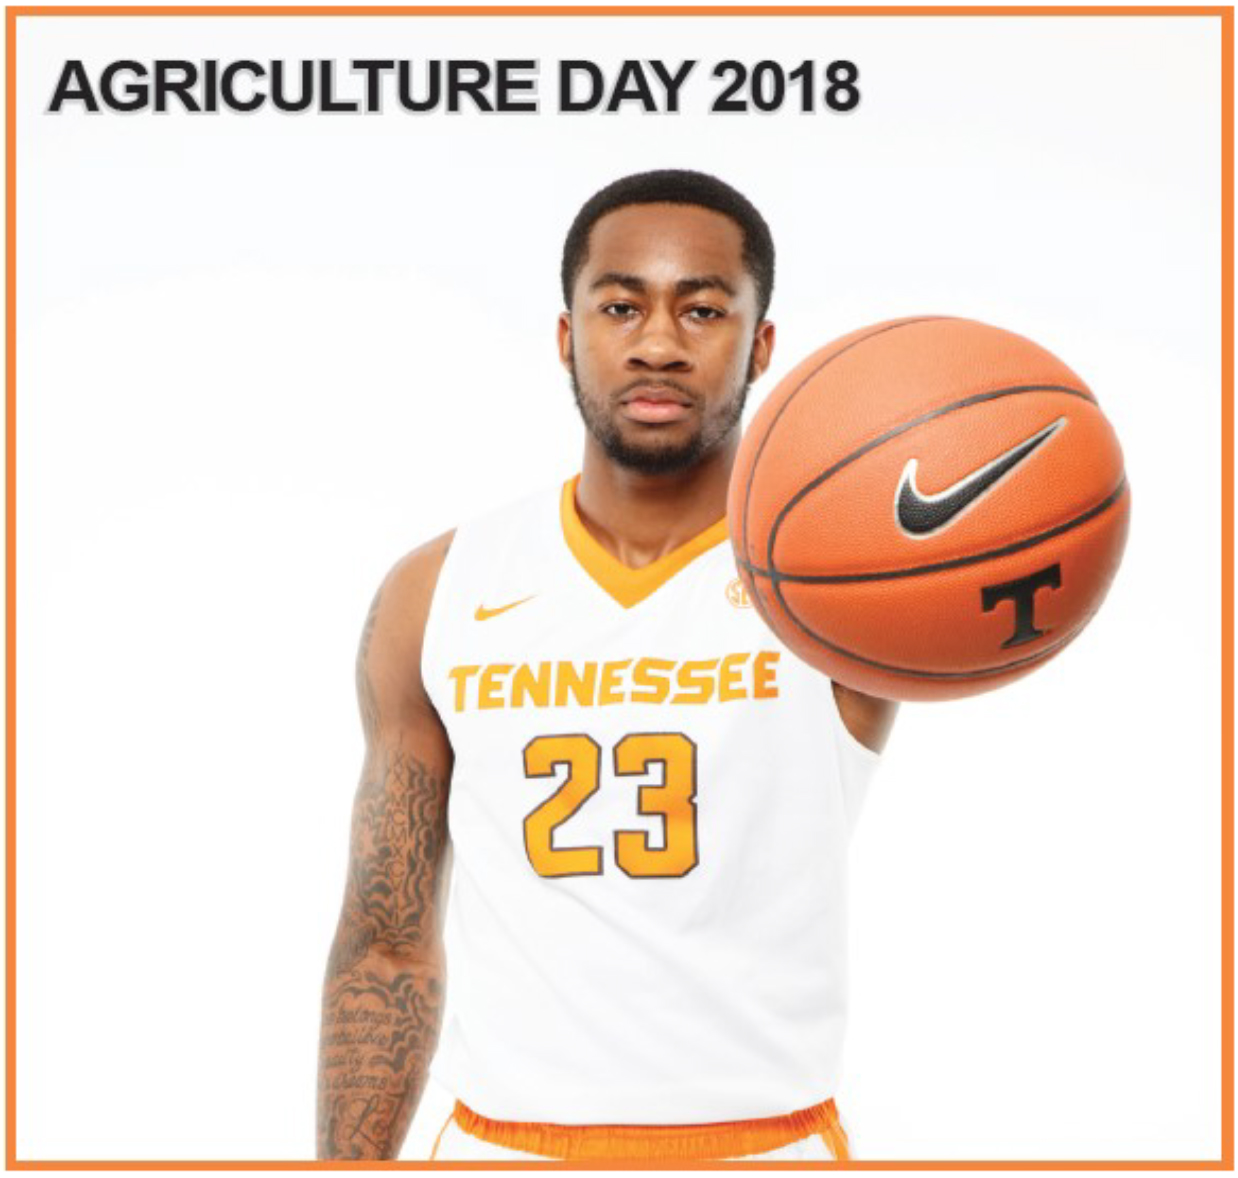 2018 Agriculture Day